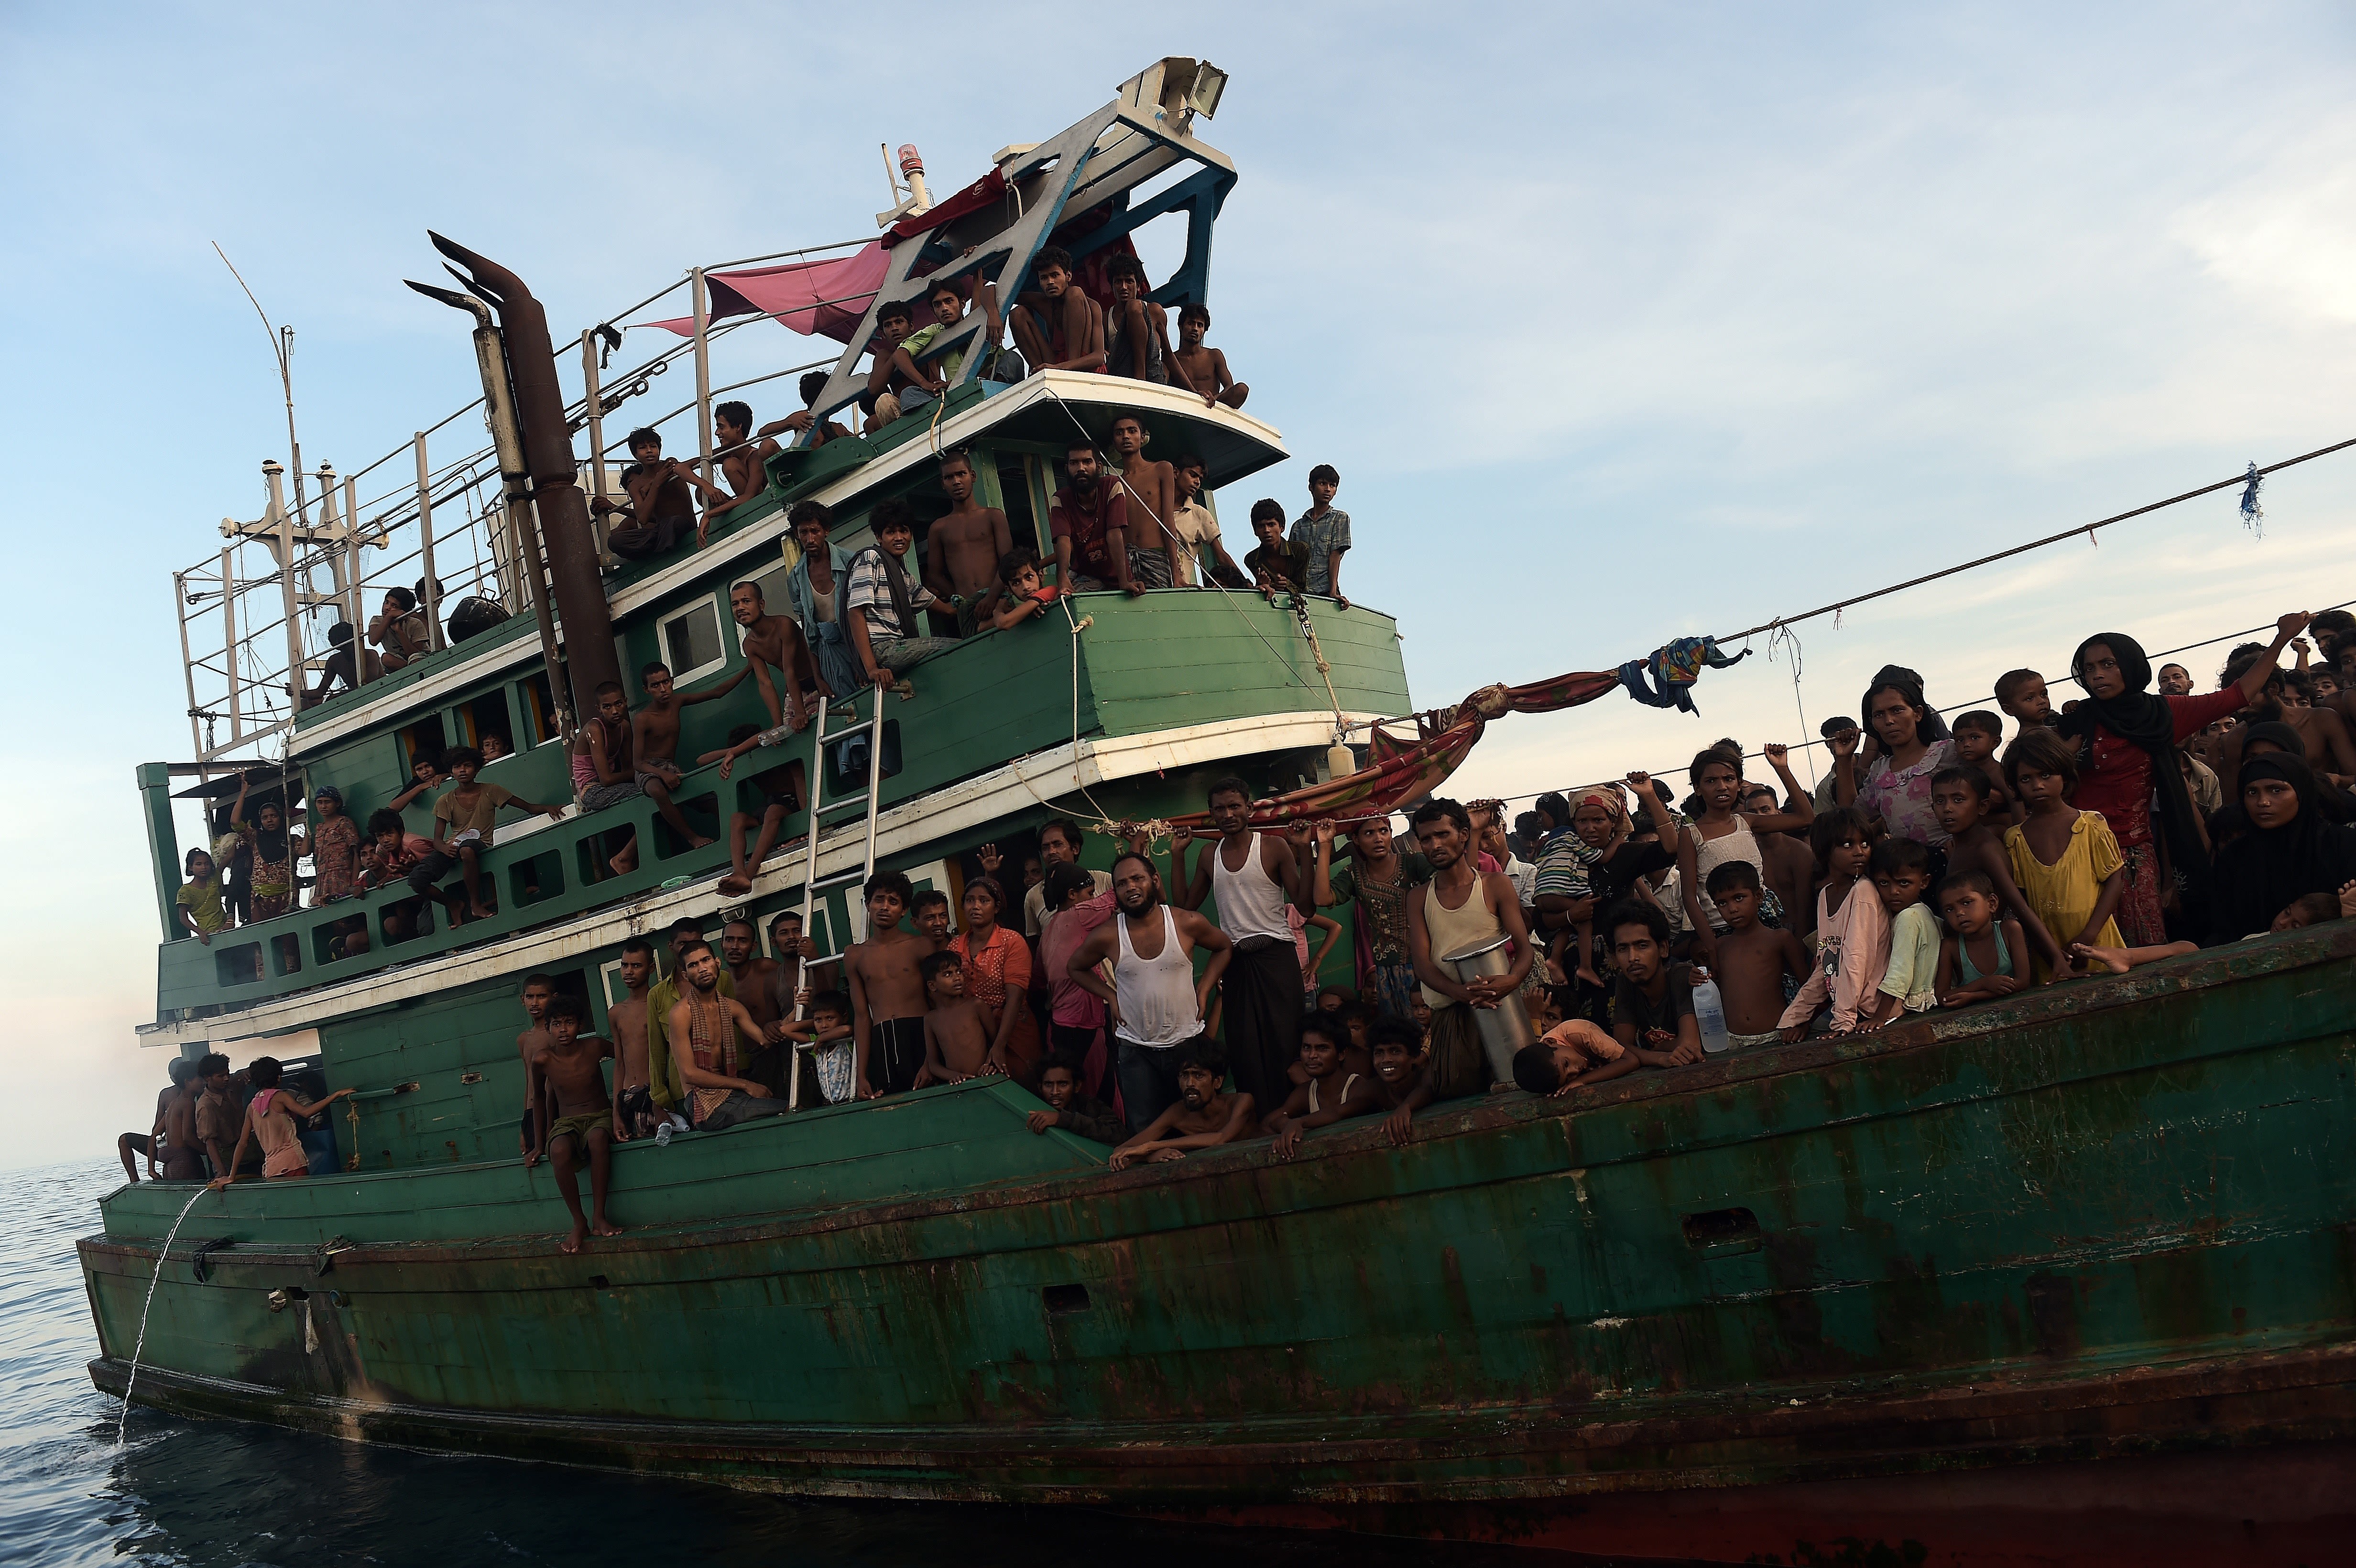 Desperate plea for help from Rohingya refugees stranded at sea for two weeks